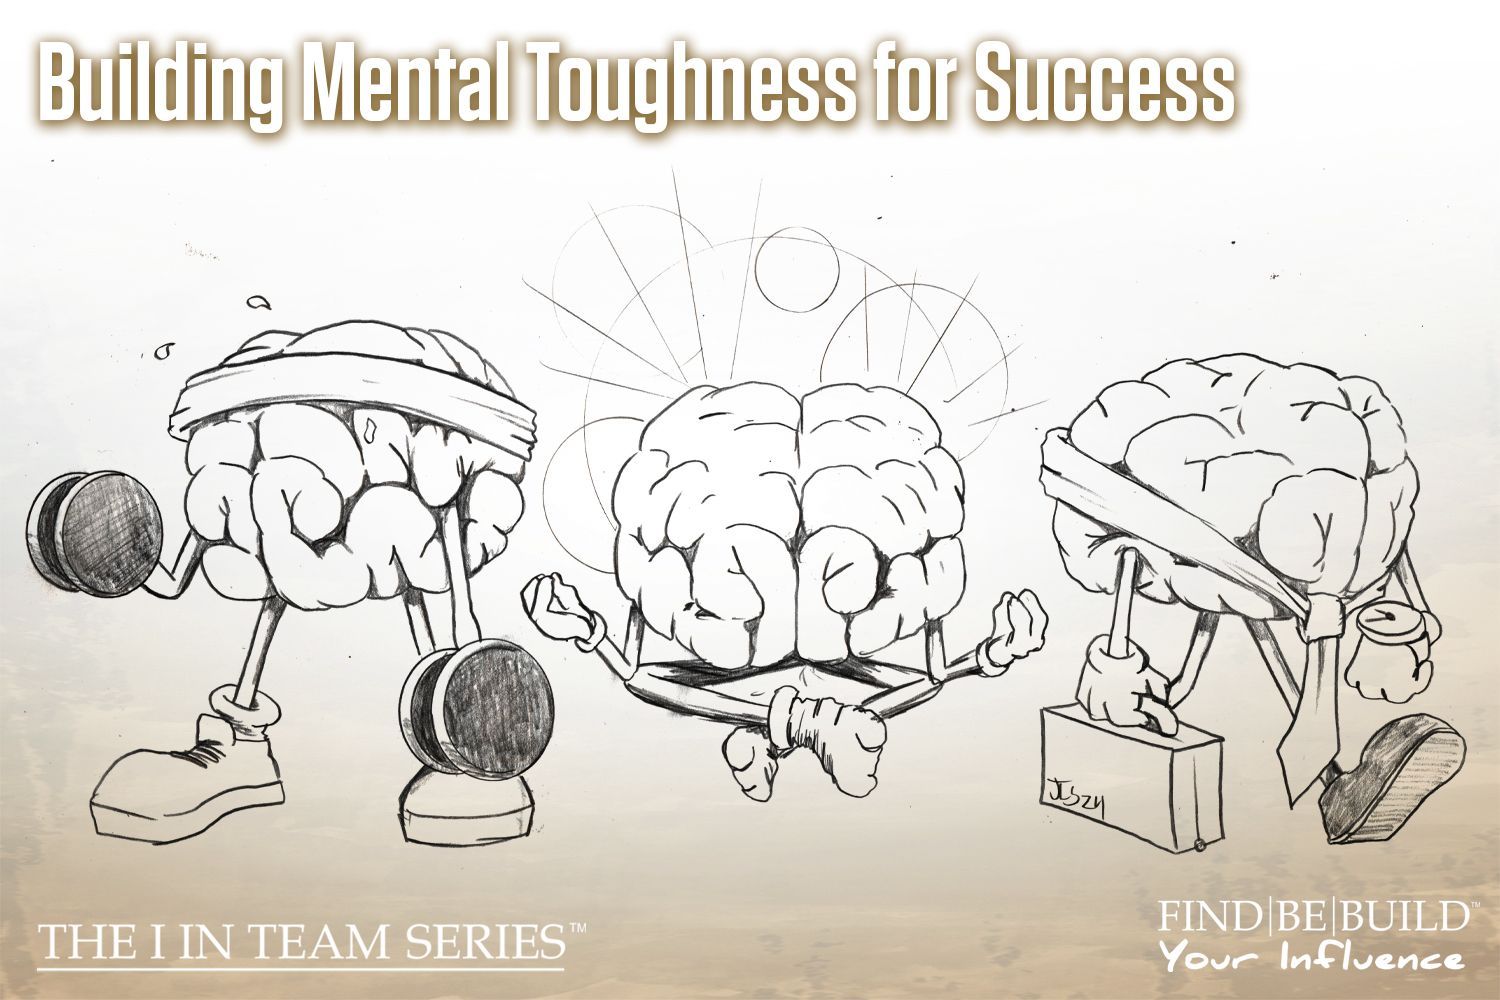 Building Mental Toughness for Success